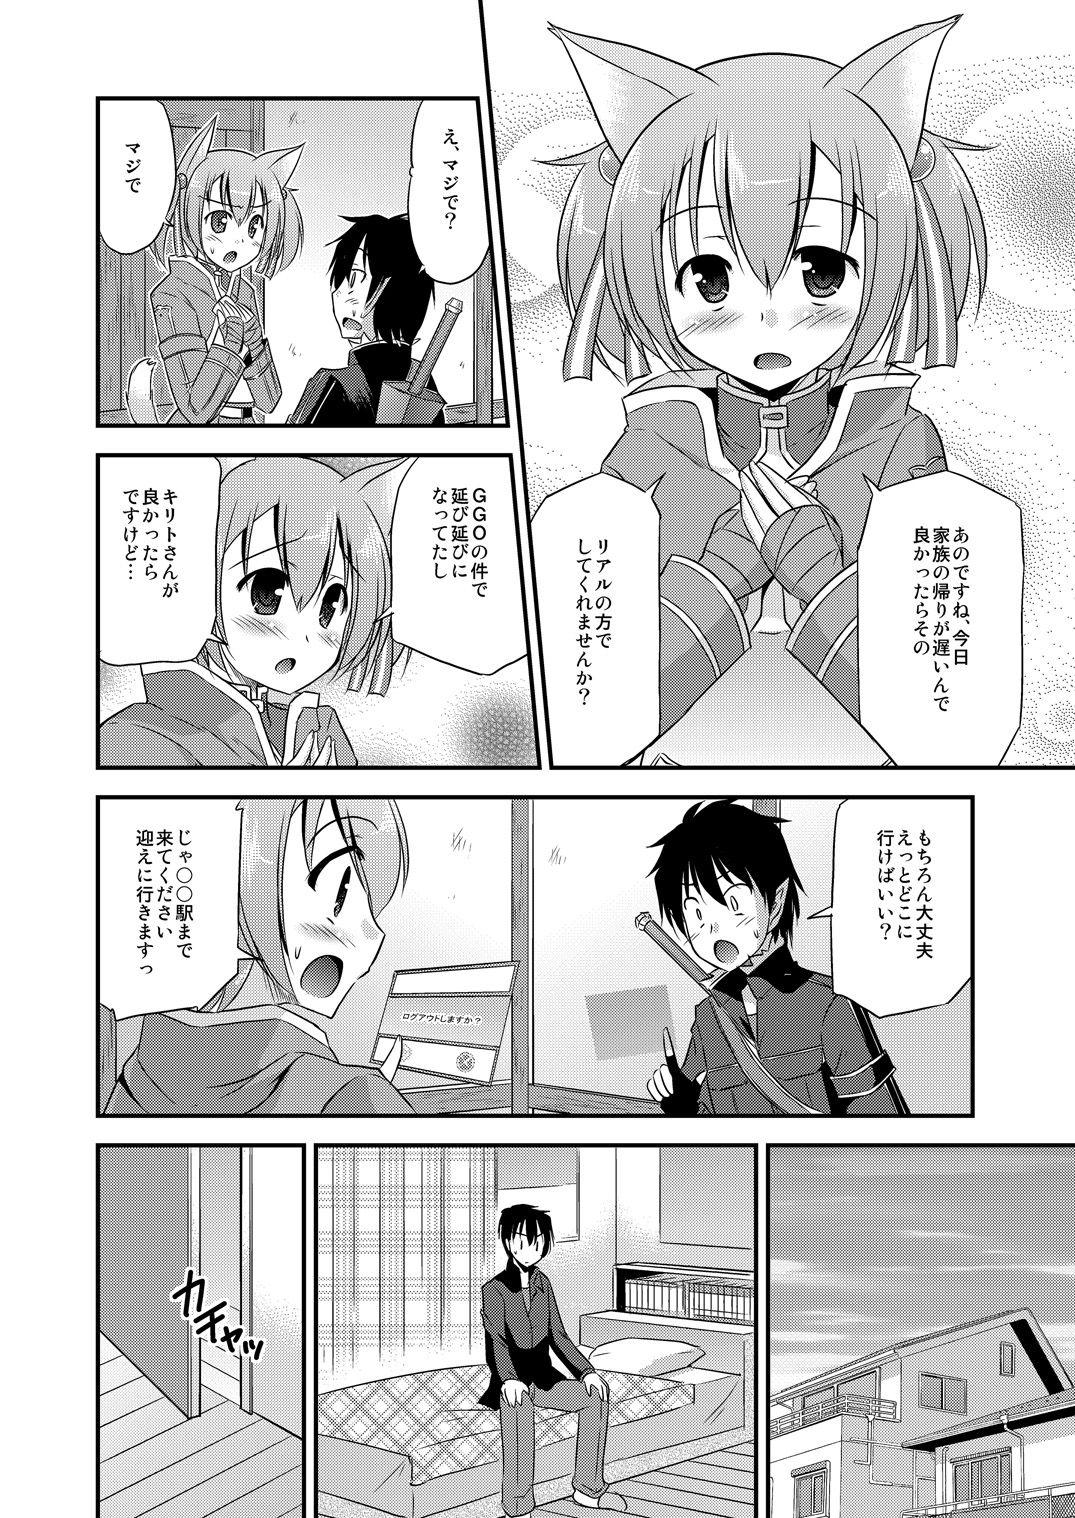 Play Silica Route Offline Phantom Parade After - Sword art online Blonde - Page 7